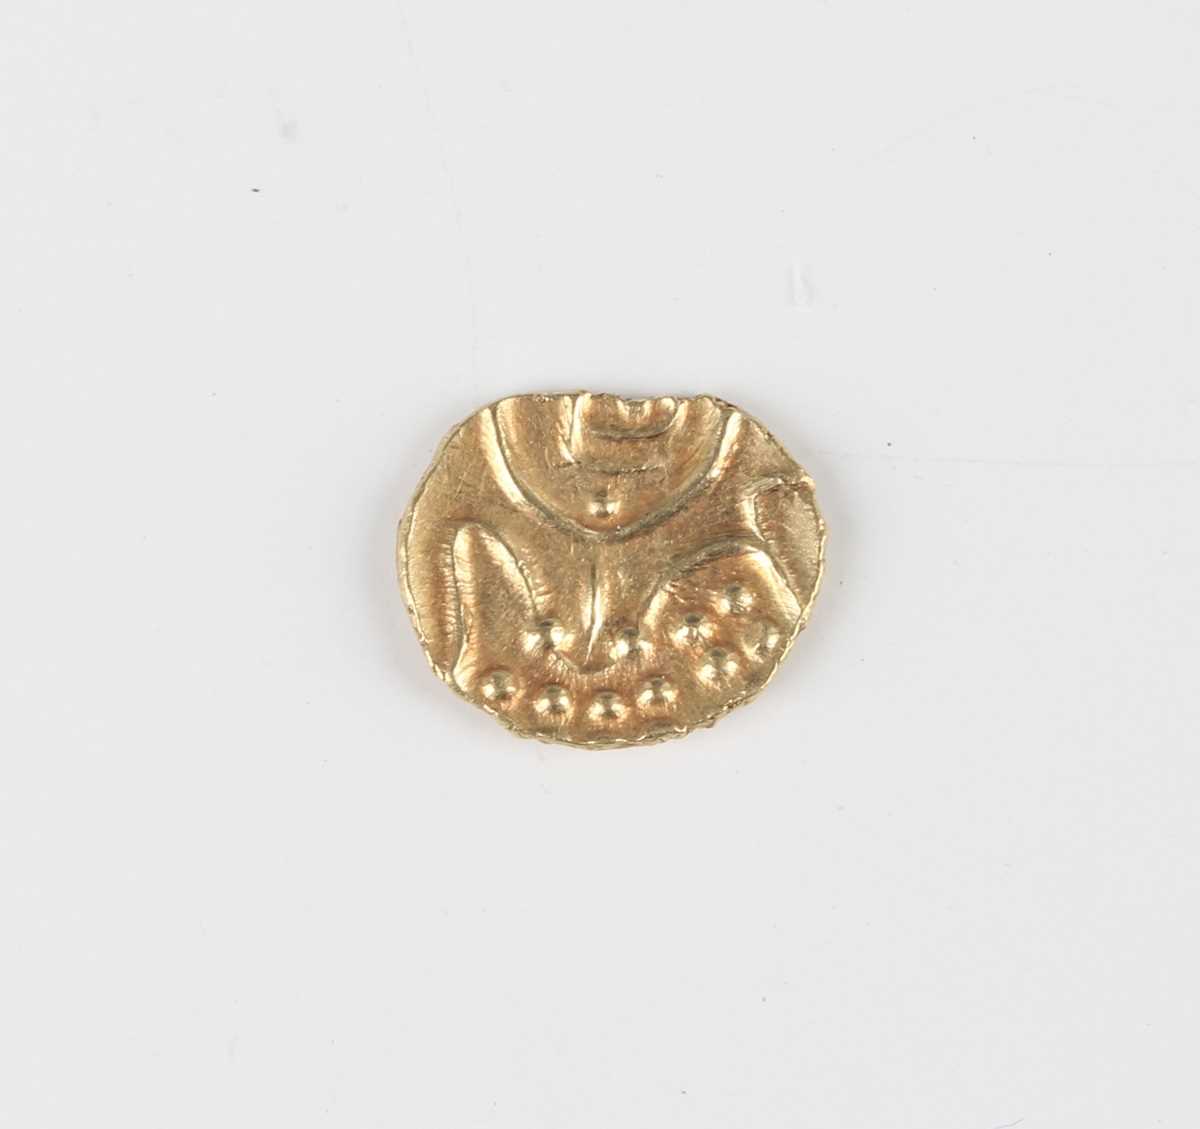 An India gold fanam, probably 18th century, together with a group of European and world coinage, - Image 4 of 5